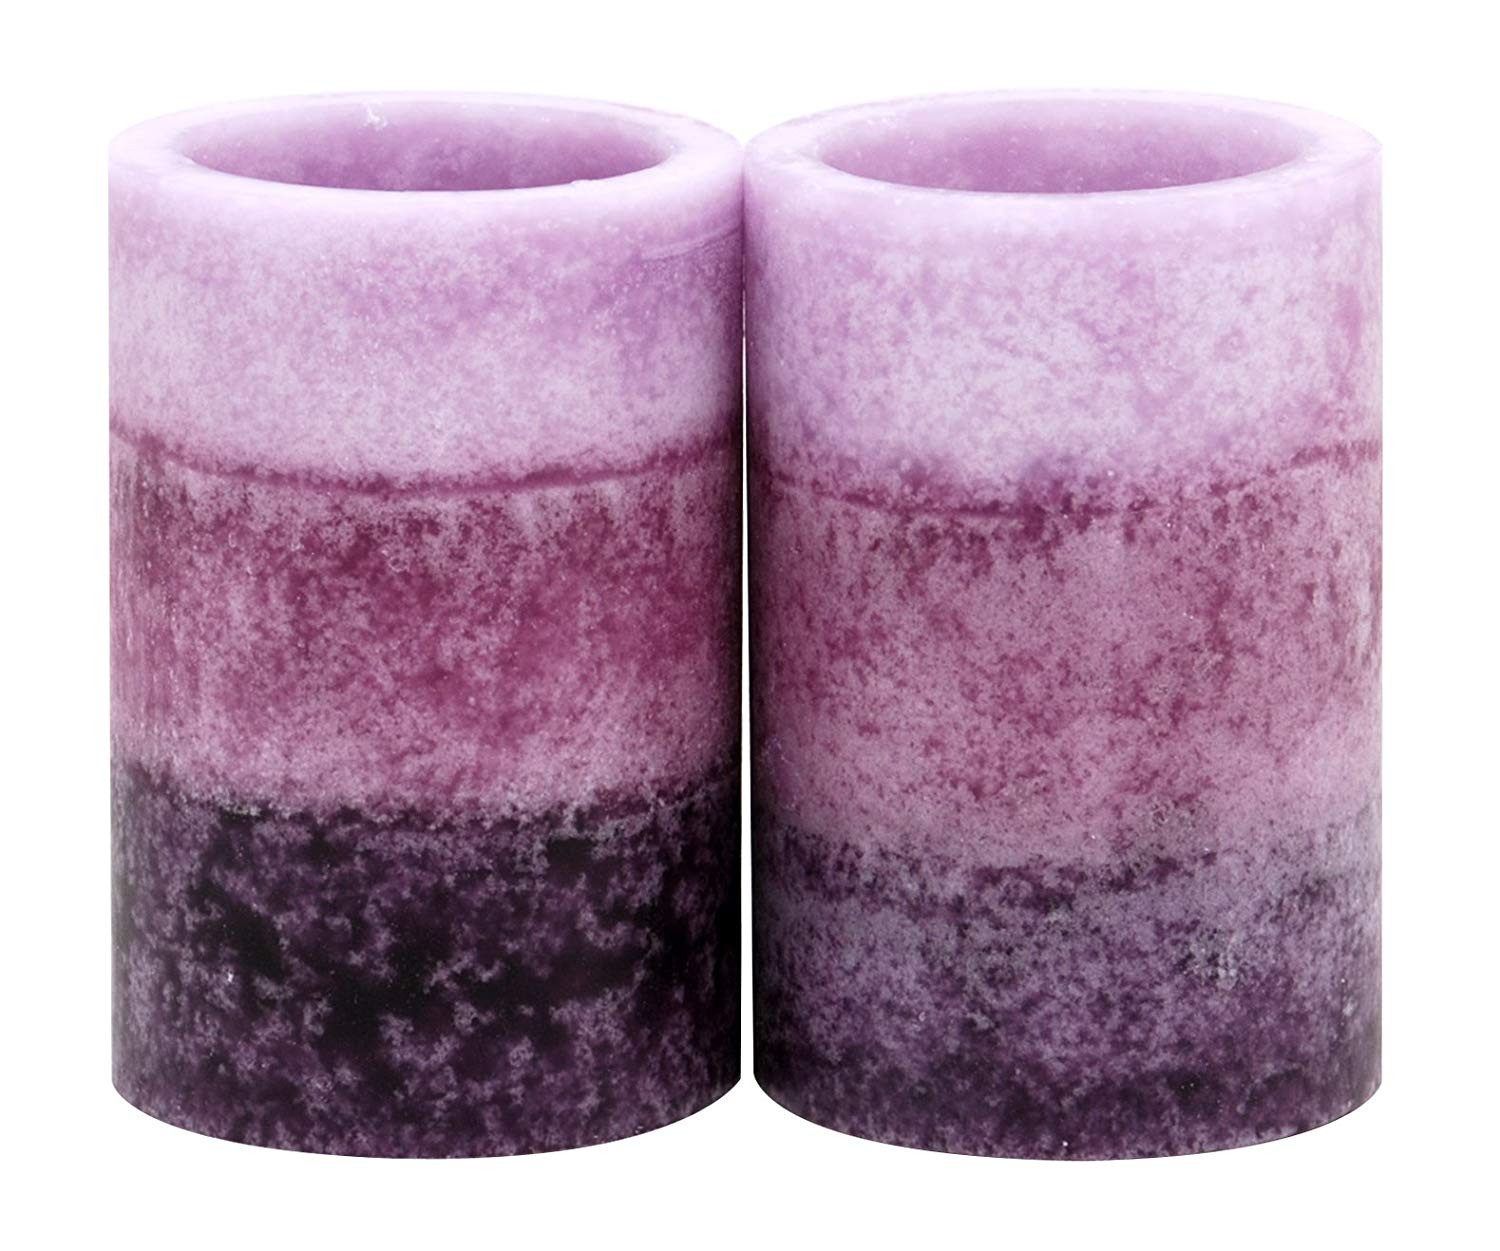 12 inch cylinder vases cheap of amazon com kiera grace 2 by 3 inch tri layer led pillar candles in amazon com kiera grace 2 by 3 inch tri layer led pillar candles mini lavender cashmere fragrance set of 2 home kitchen